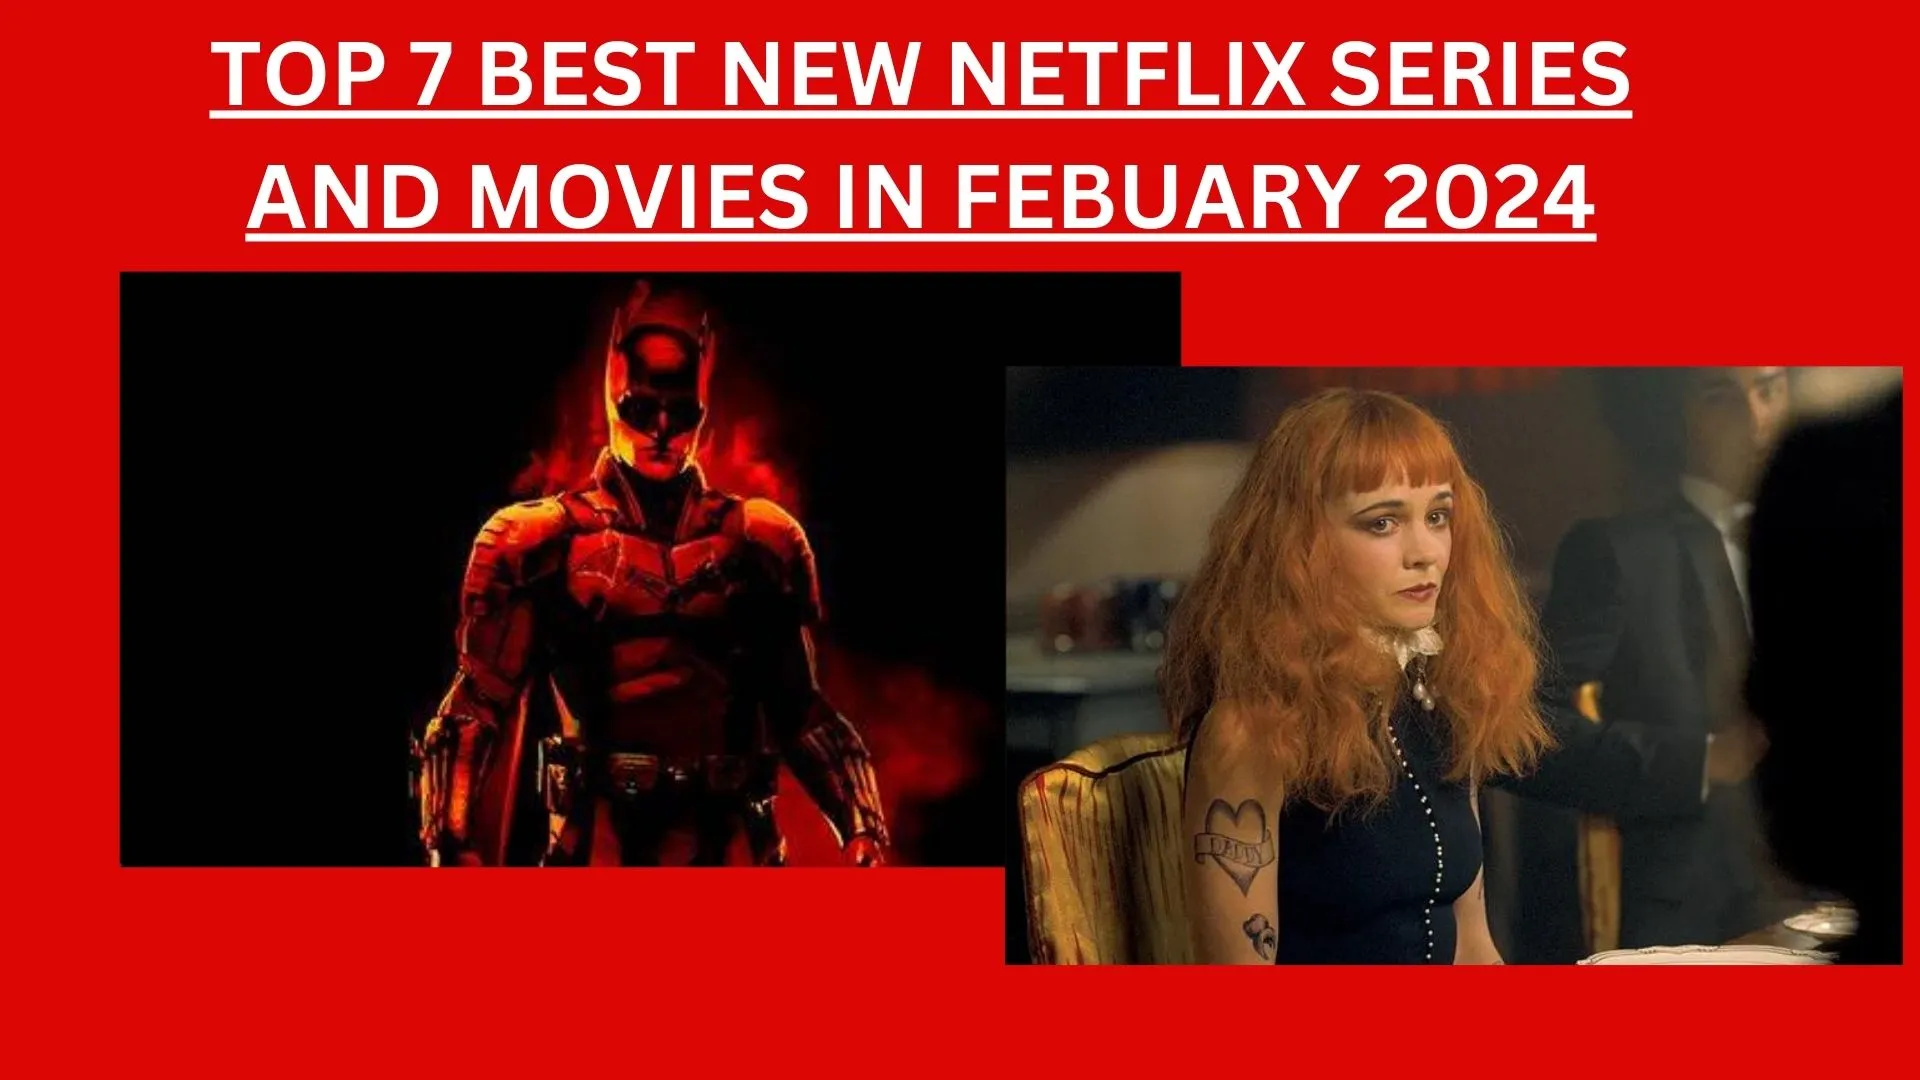 TOP 7 BEST NEW NETFLIX SERIES AND MOVIES IN FEBUARY 2024